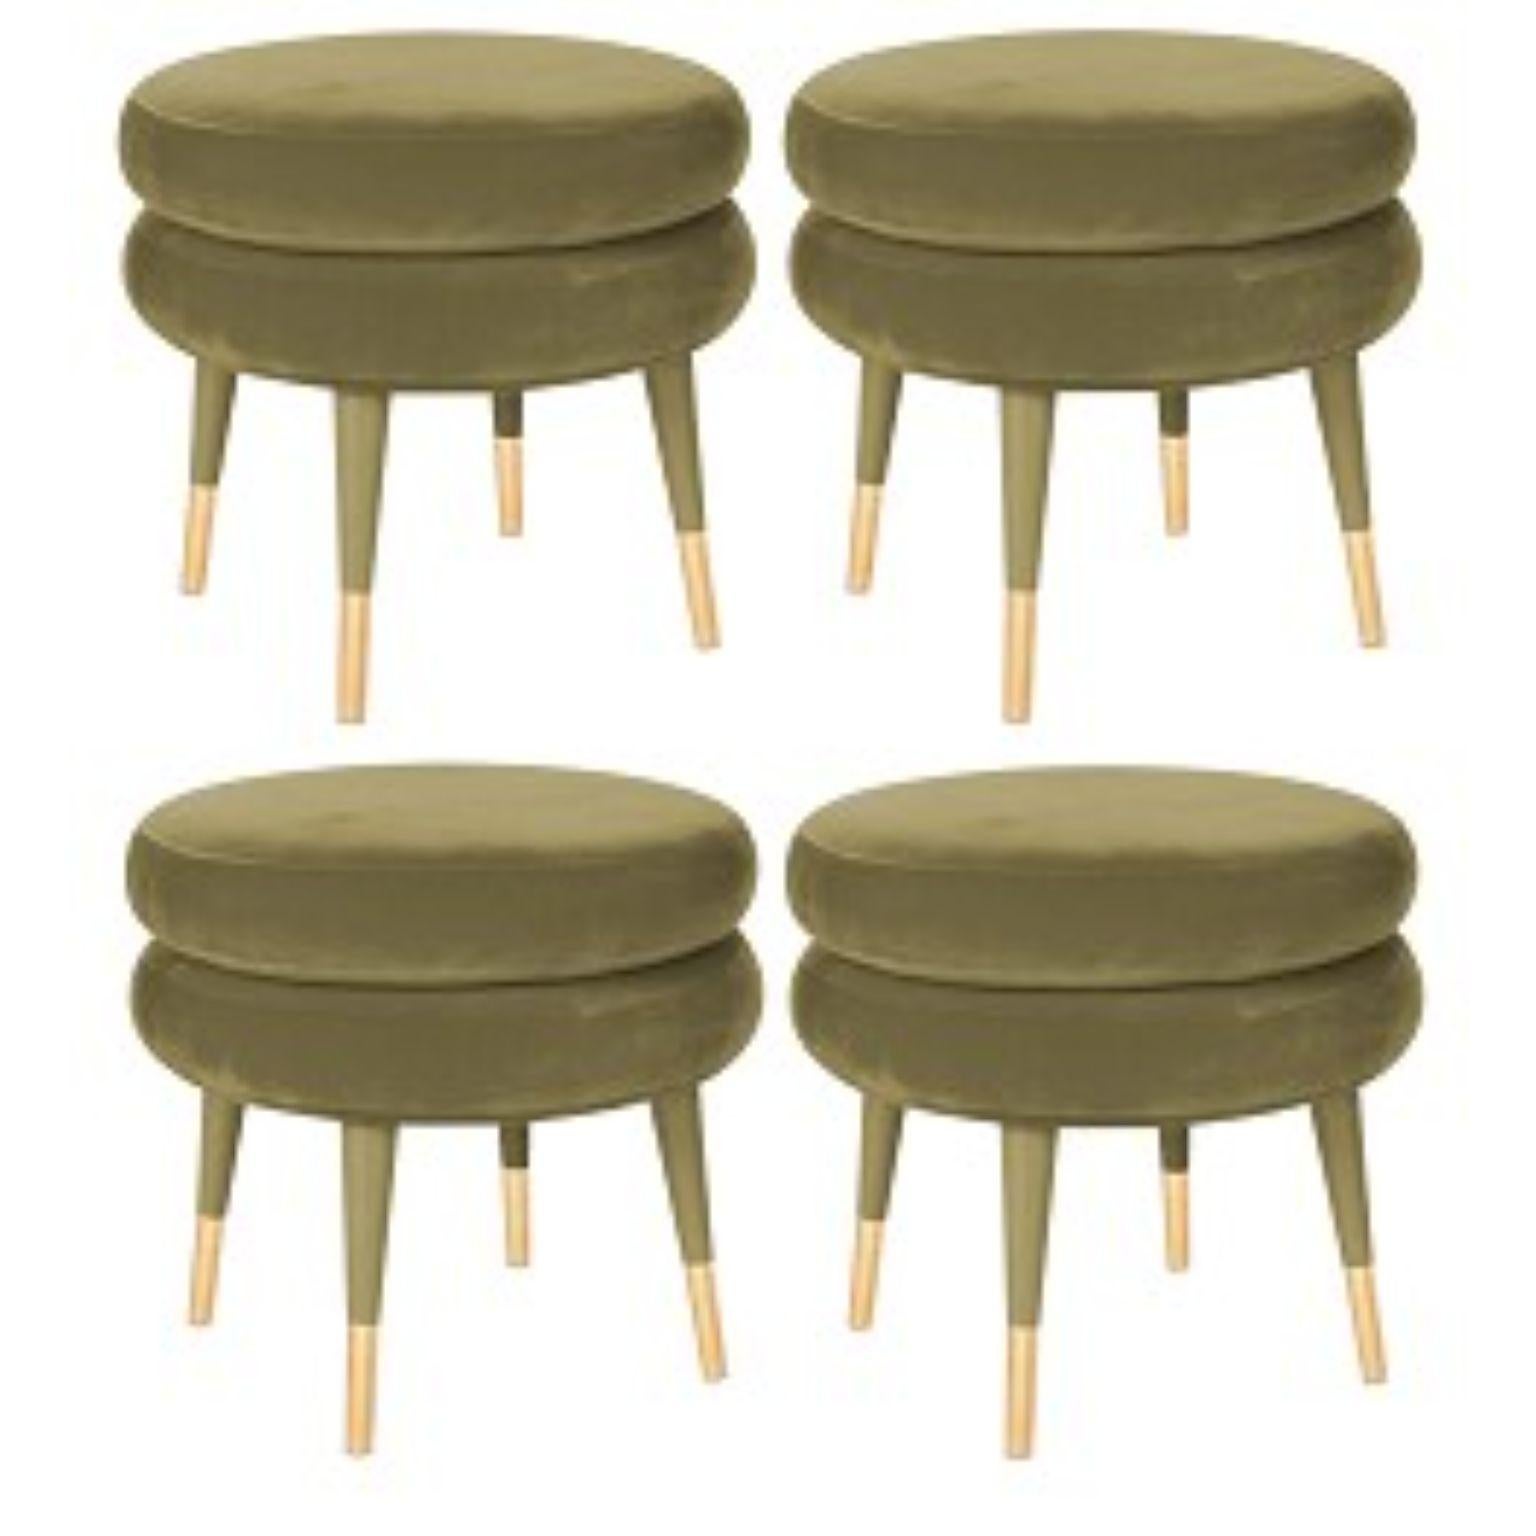 Set of 4 marshmallow stools, Royal Stranger
Dimensions: 45 x 50 x 50 cm
Materials: Velvet upholestery, brass
Available in: Mint green, light pink, royal green, royal red.

Royal Stranger is an exclusive furniture brand determined to bring you